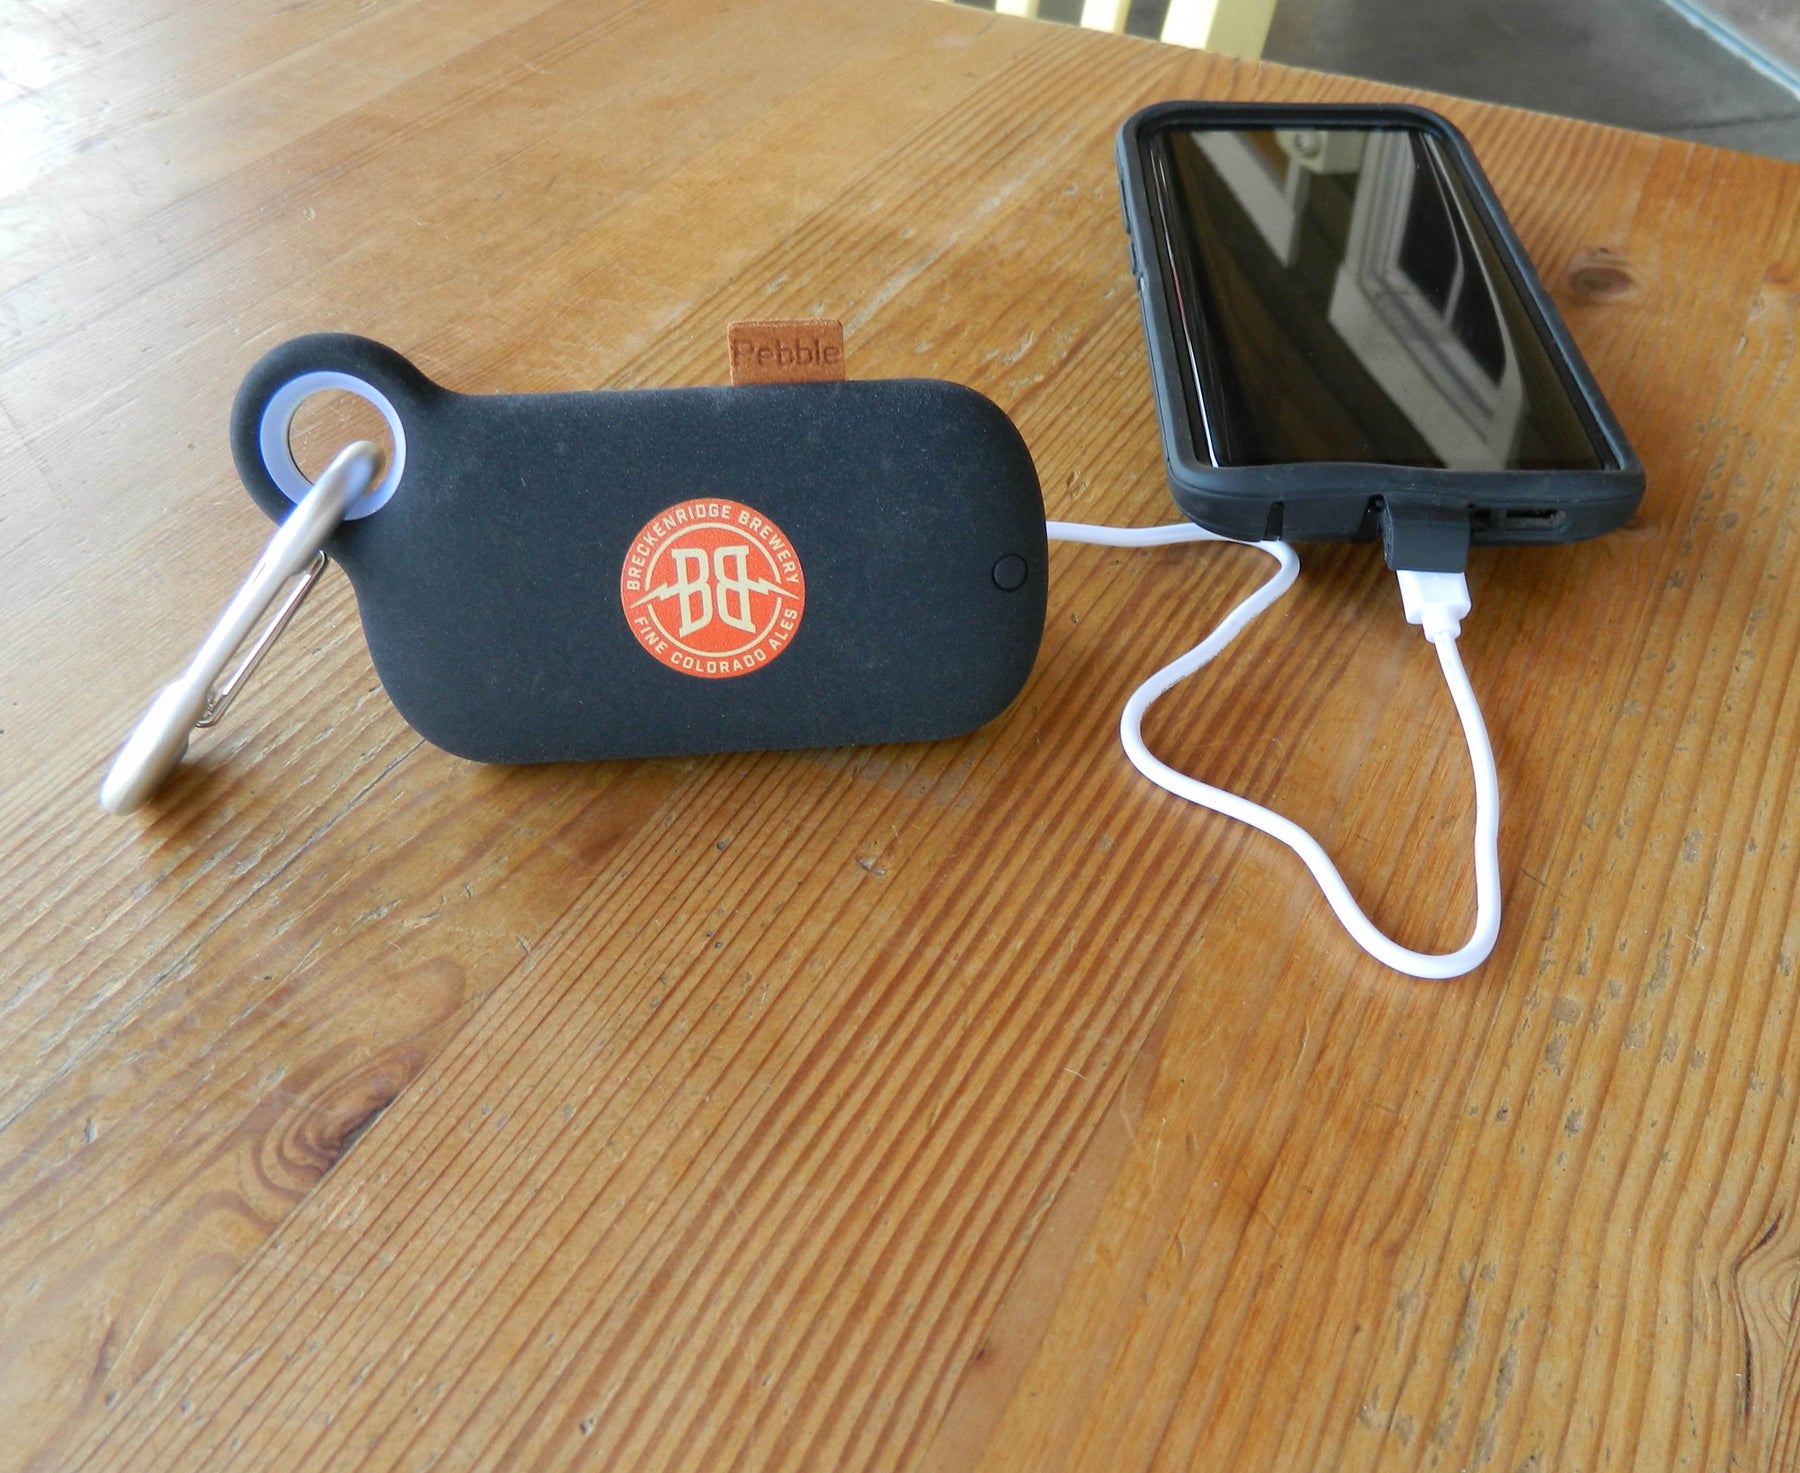 Pebble Portable Phone Charger